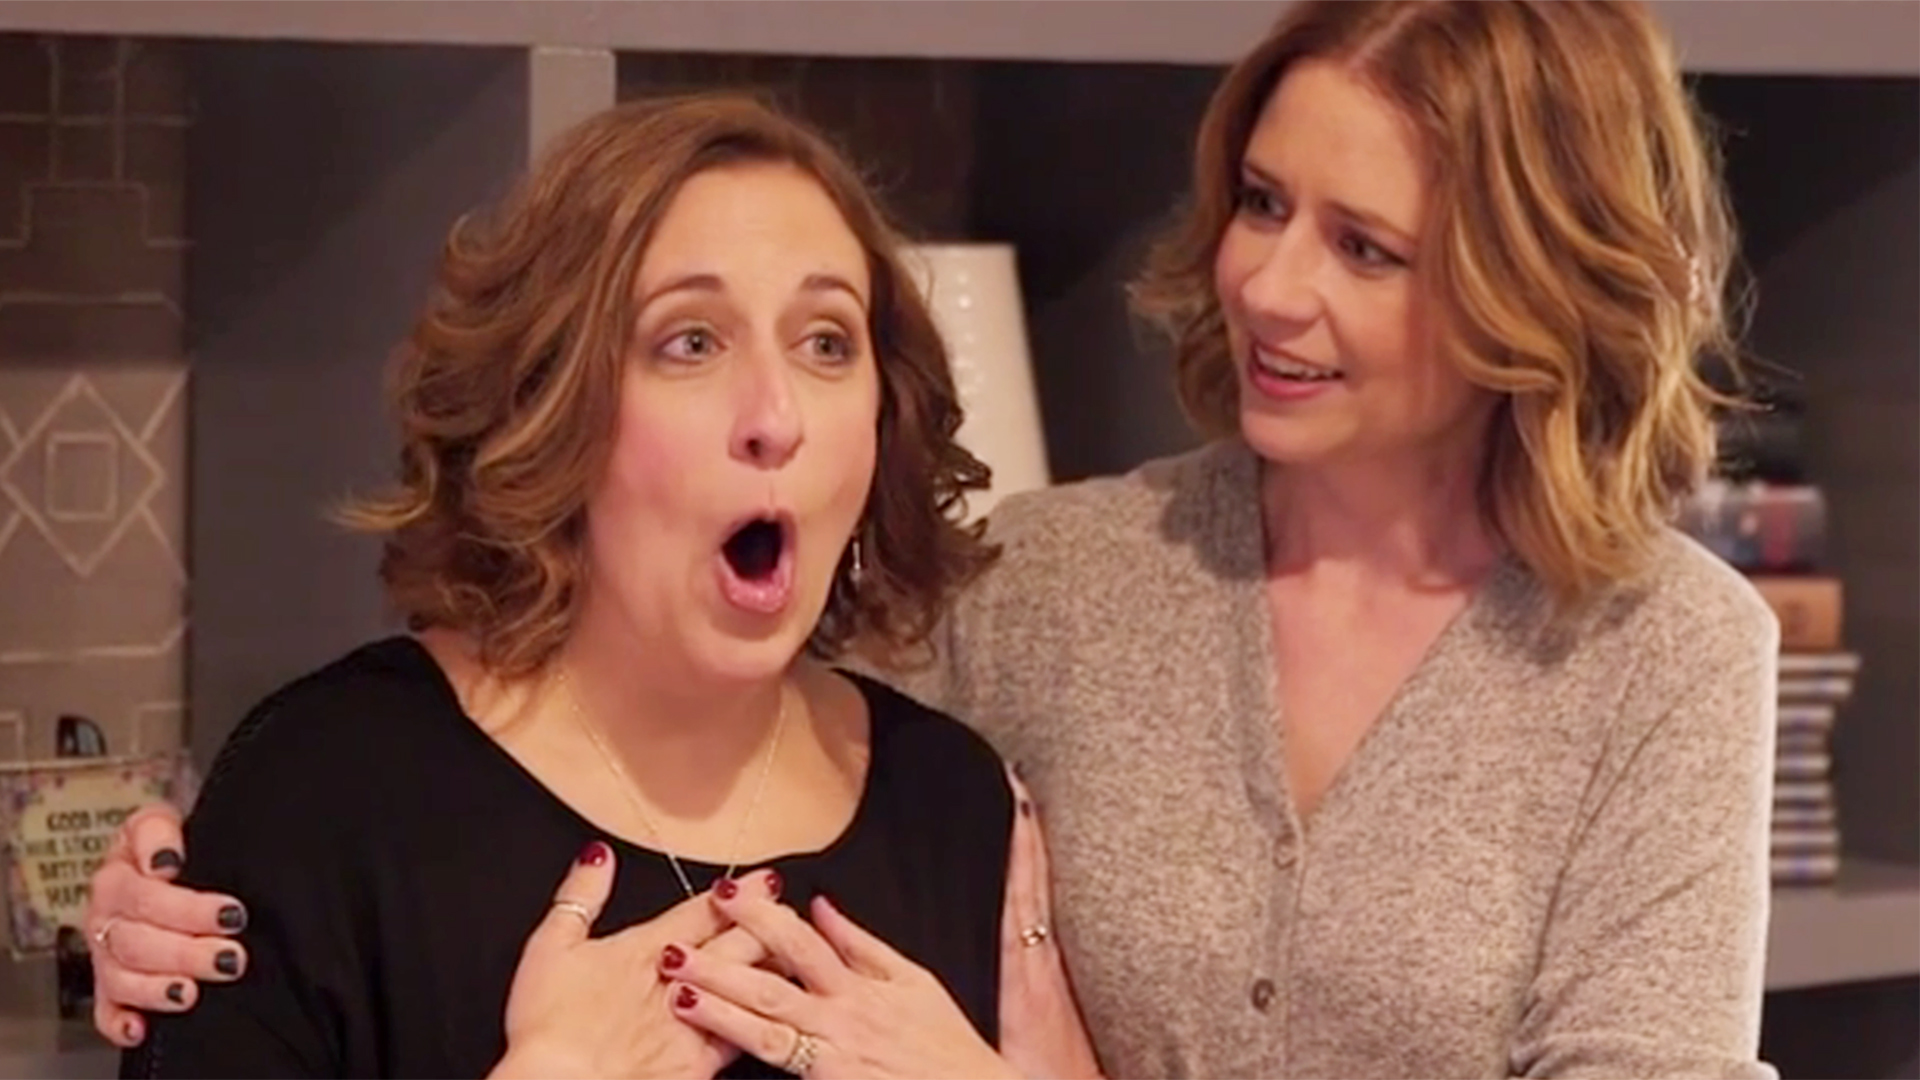 Jenna Fischer surprised her sister with a home makeover.